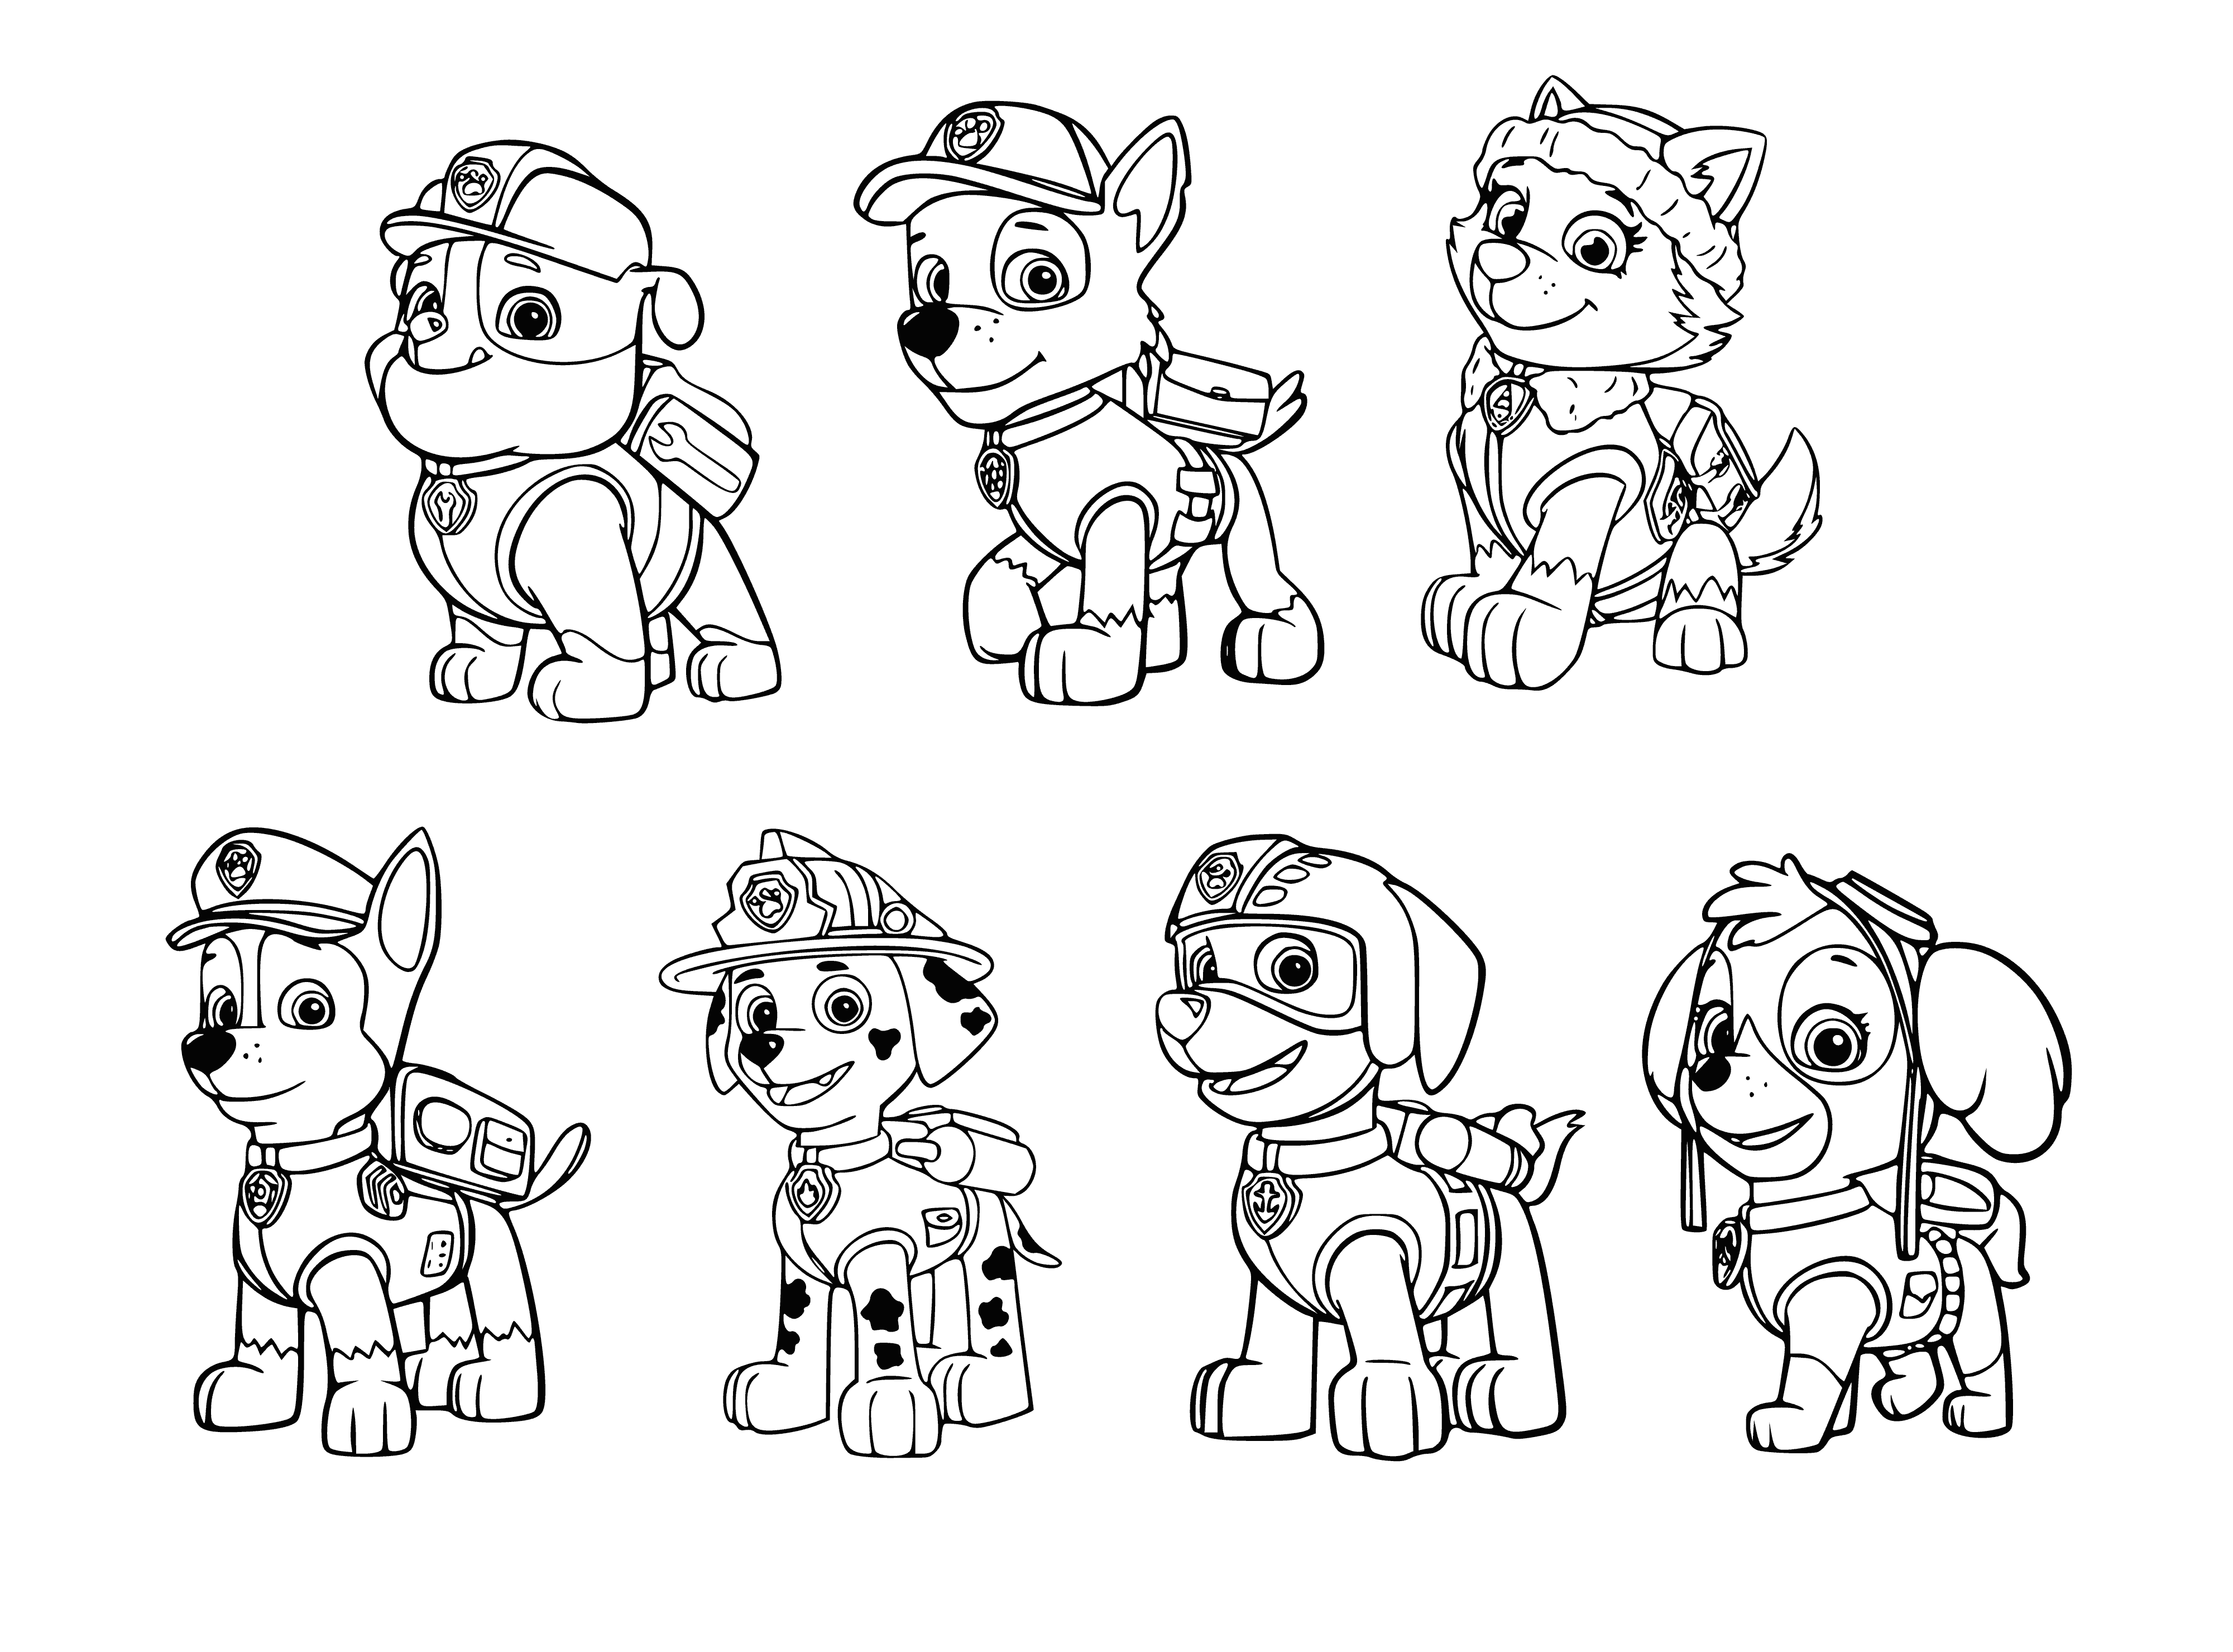 coloring page: The Paw Patrol puppies are trained and ready to help keep their community safe! Each pup has a unique uniform & job to do. #pawpatrol #medical #flashlight #rope #badge #communityservice